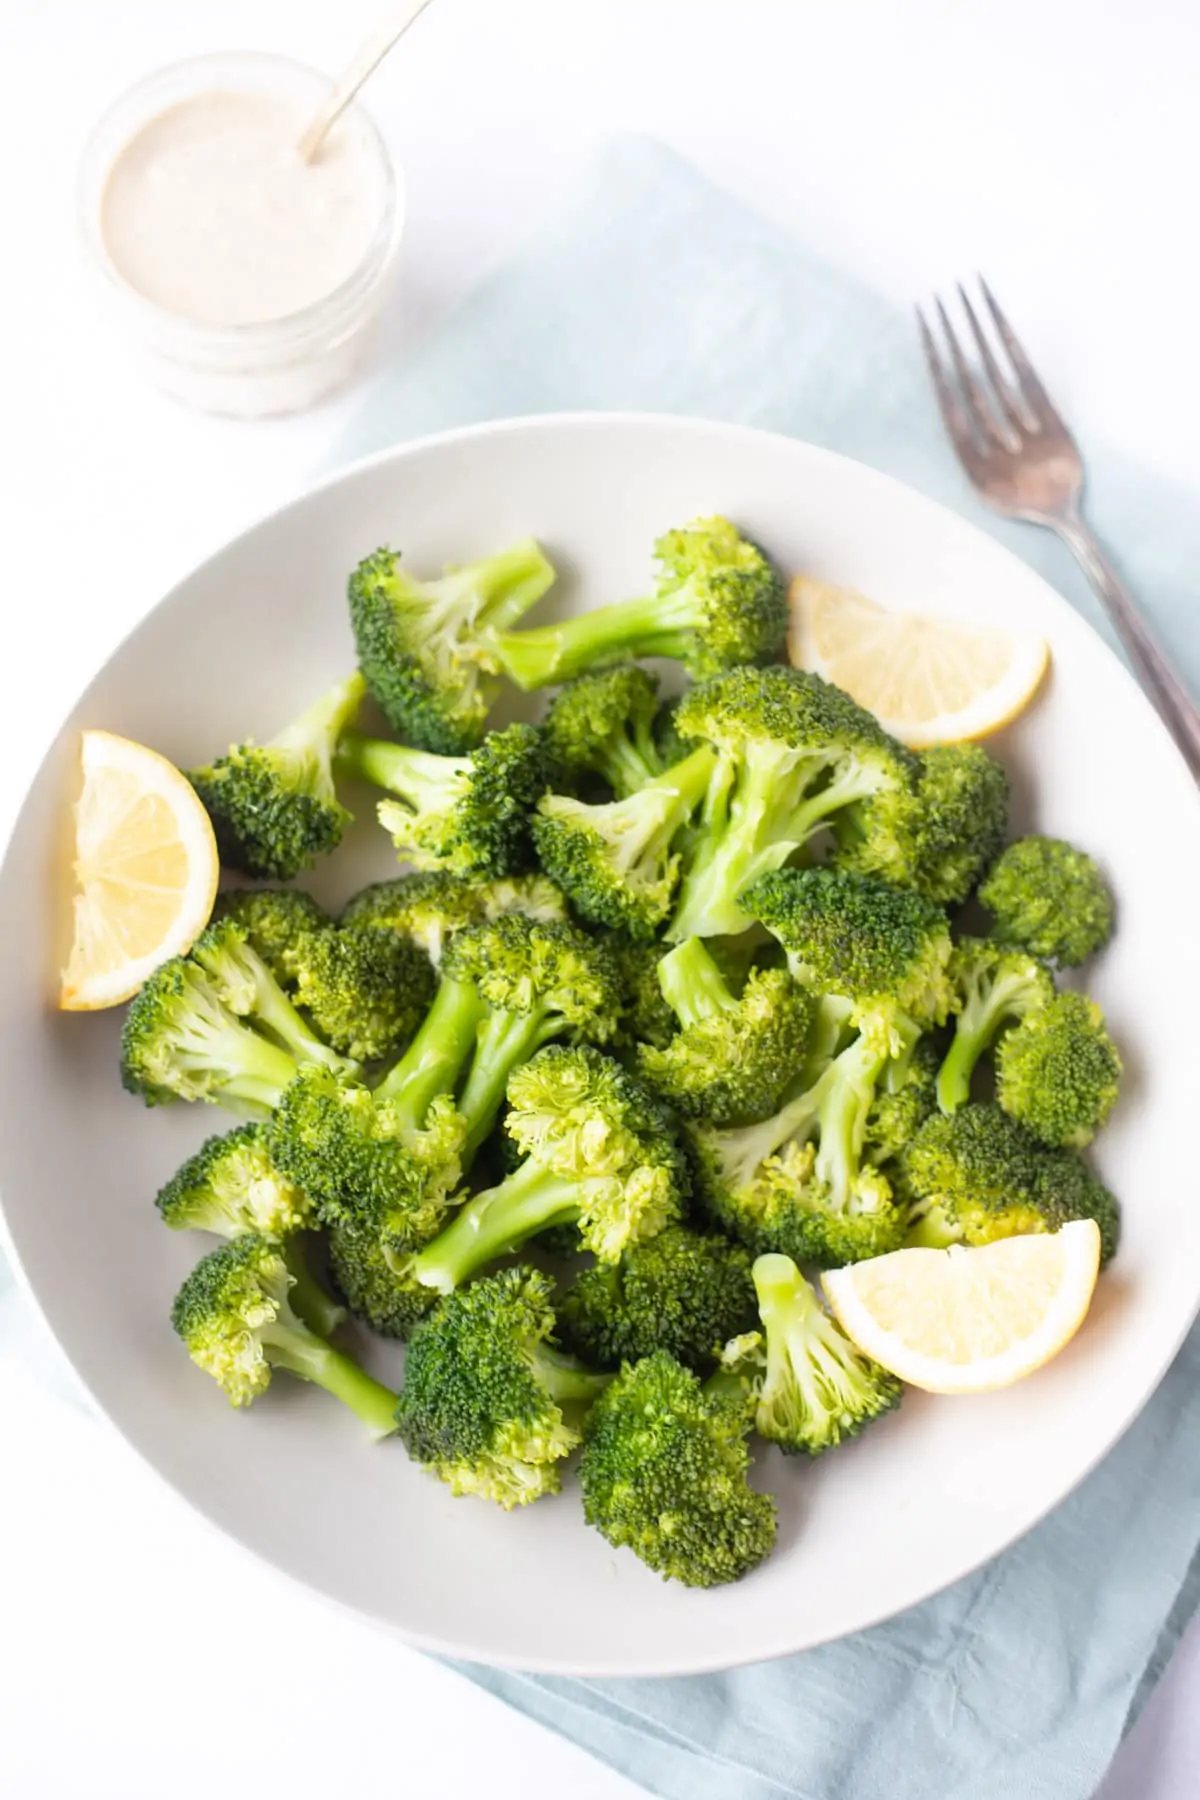 steamed broccoli in a bowl served with lemon wedges and tahini dip